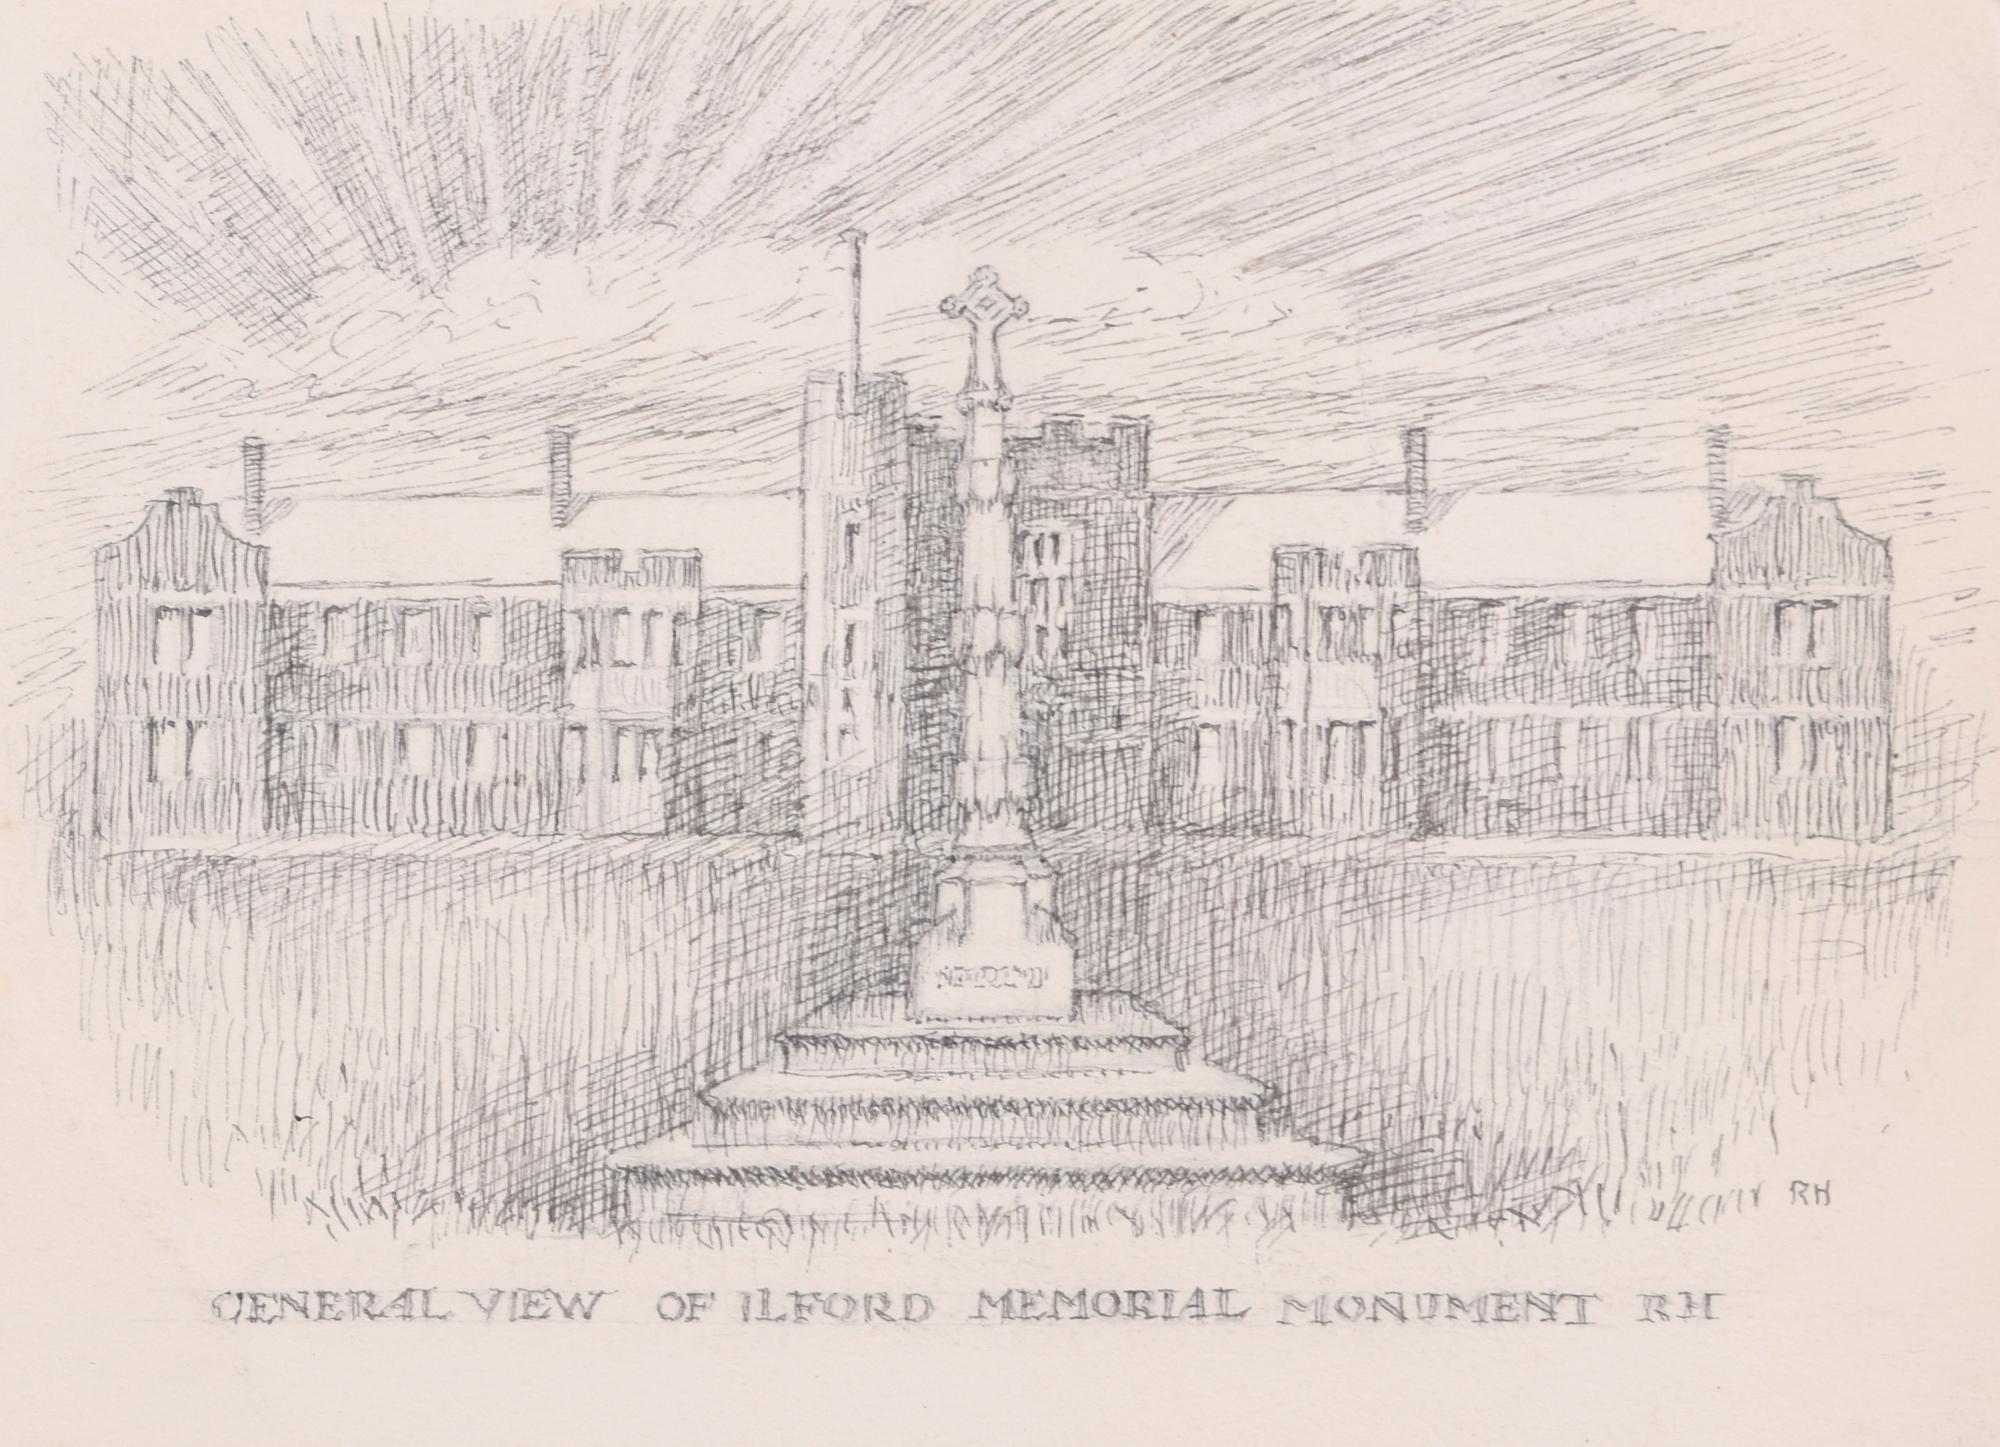 To see more, scroll down to "More from this Seller" and below it click on "See all from this Seller." 

Reginald Hallward (1858 - 1948)
Ilford War Memorial design
Pencil on paper
15 x 10 cm

Initialled lower right in pencil.

Hallward's design is